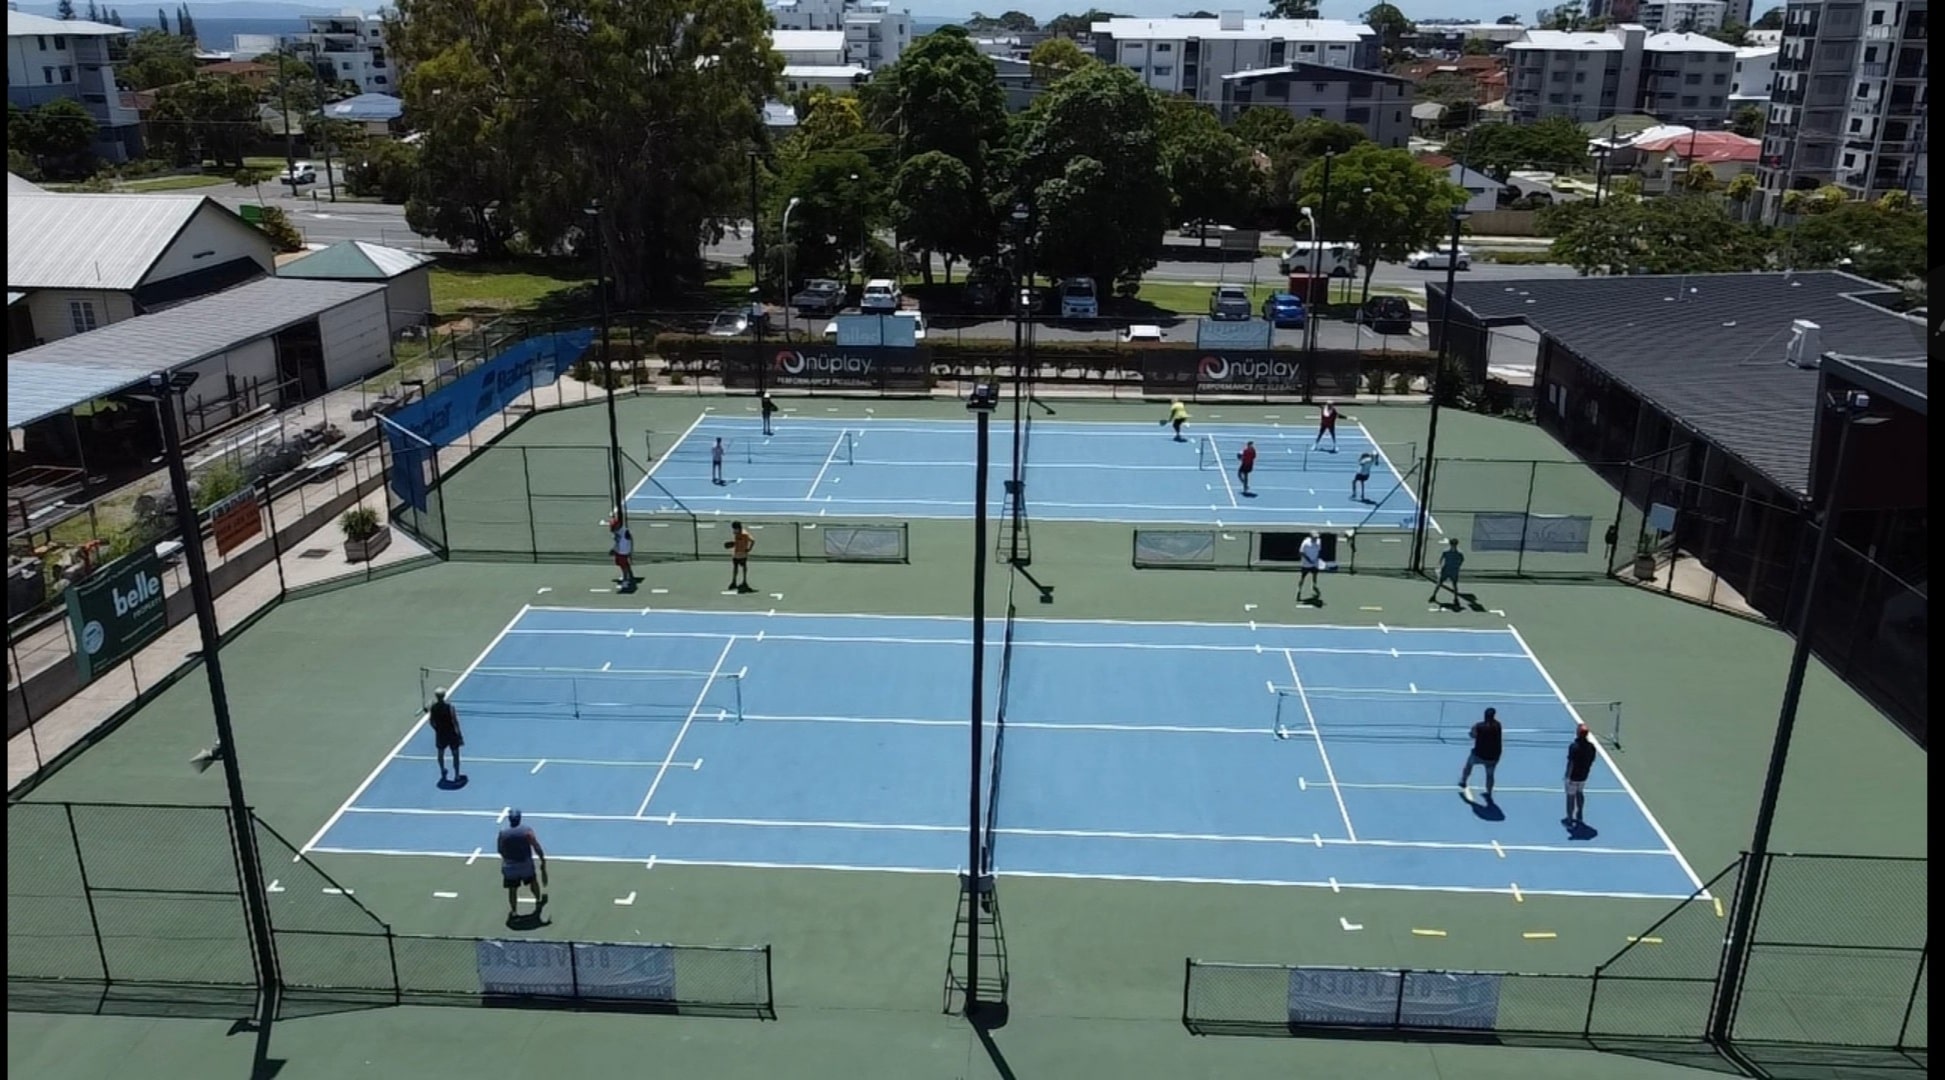 Close drone shot of Focus Tennis Academy tennis court with players